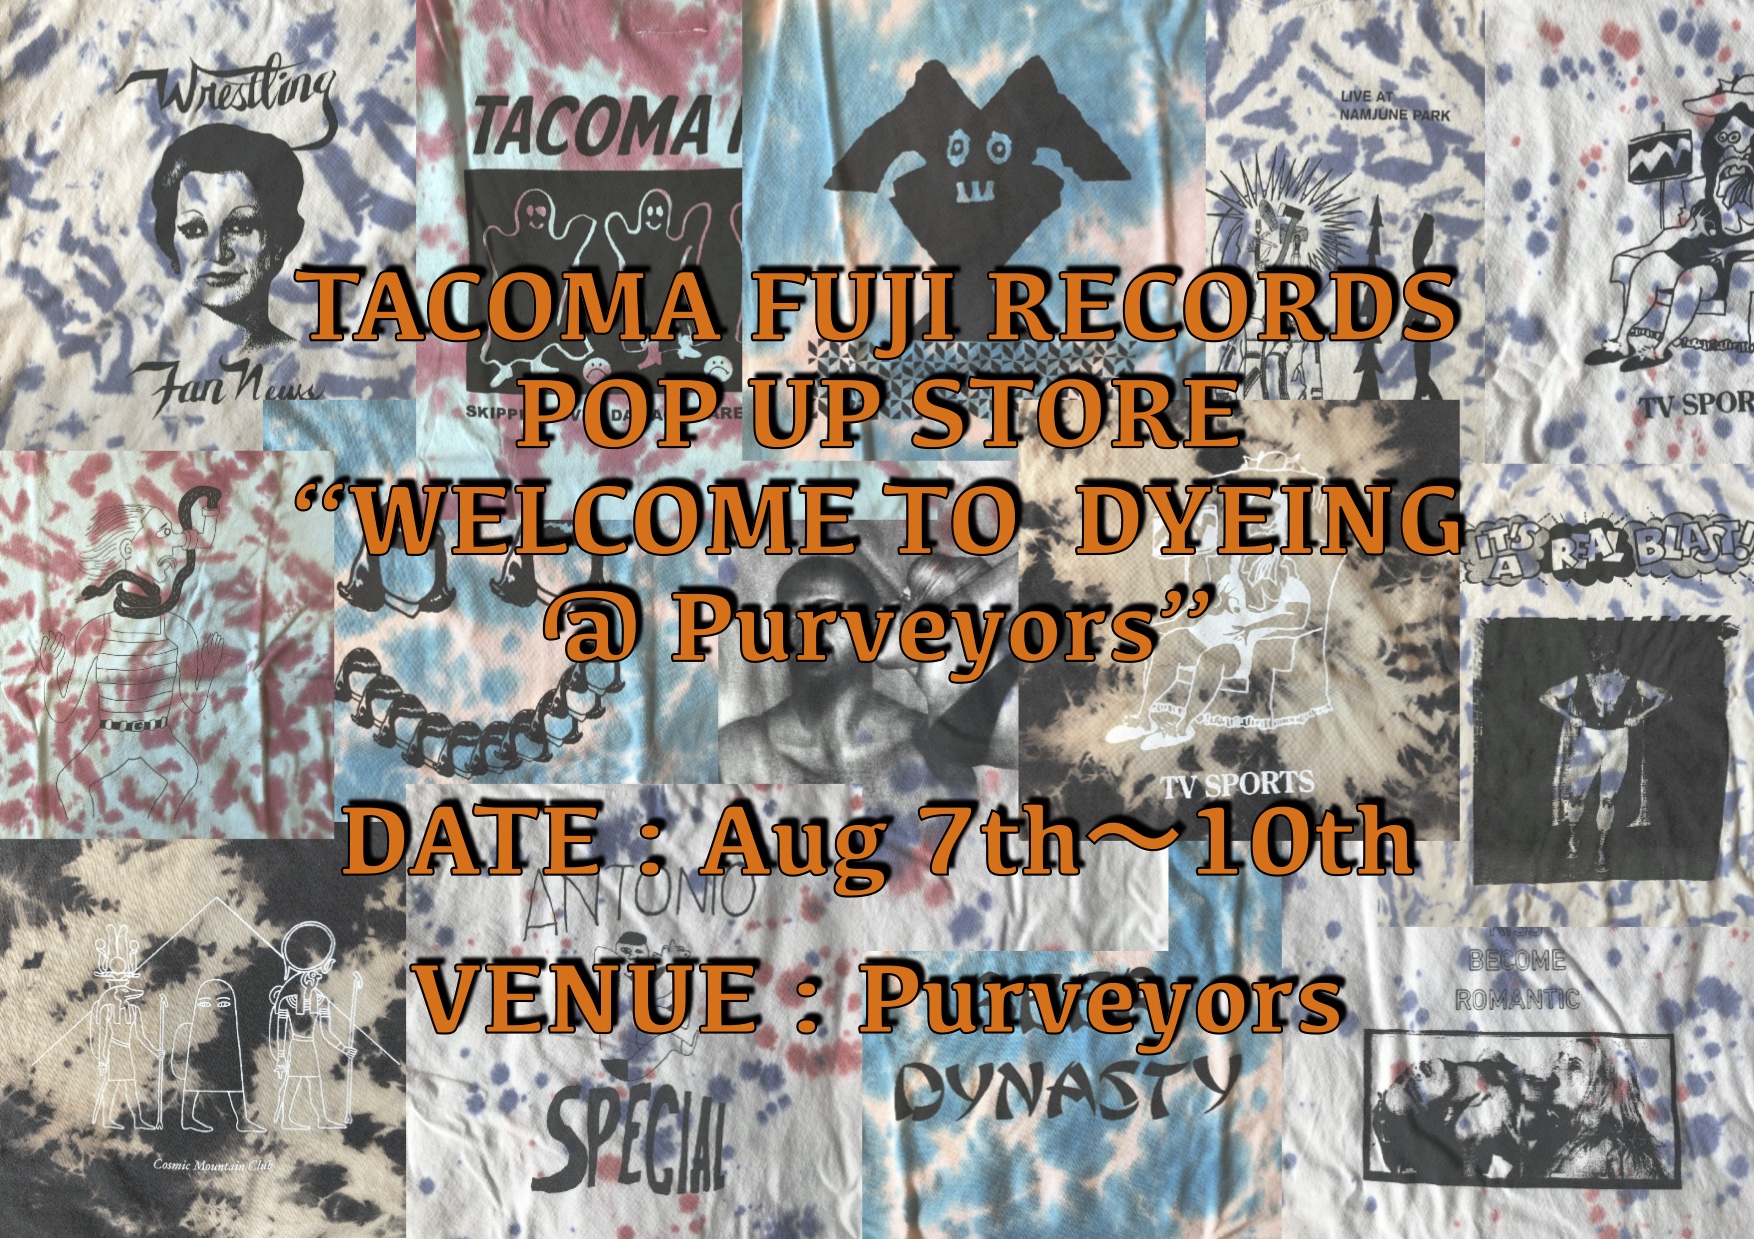 8/7-10  TACOMA FUJI RECORDS POP UP STORE  “WELCOME TO DYEING @ Purveyors”